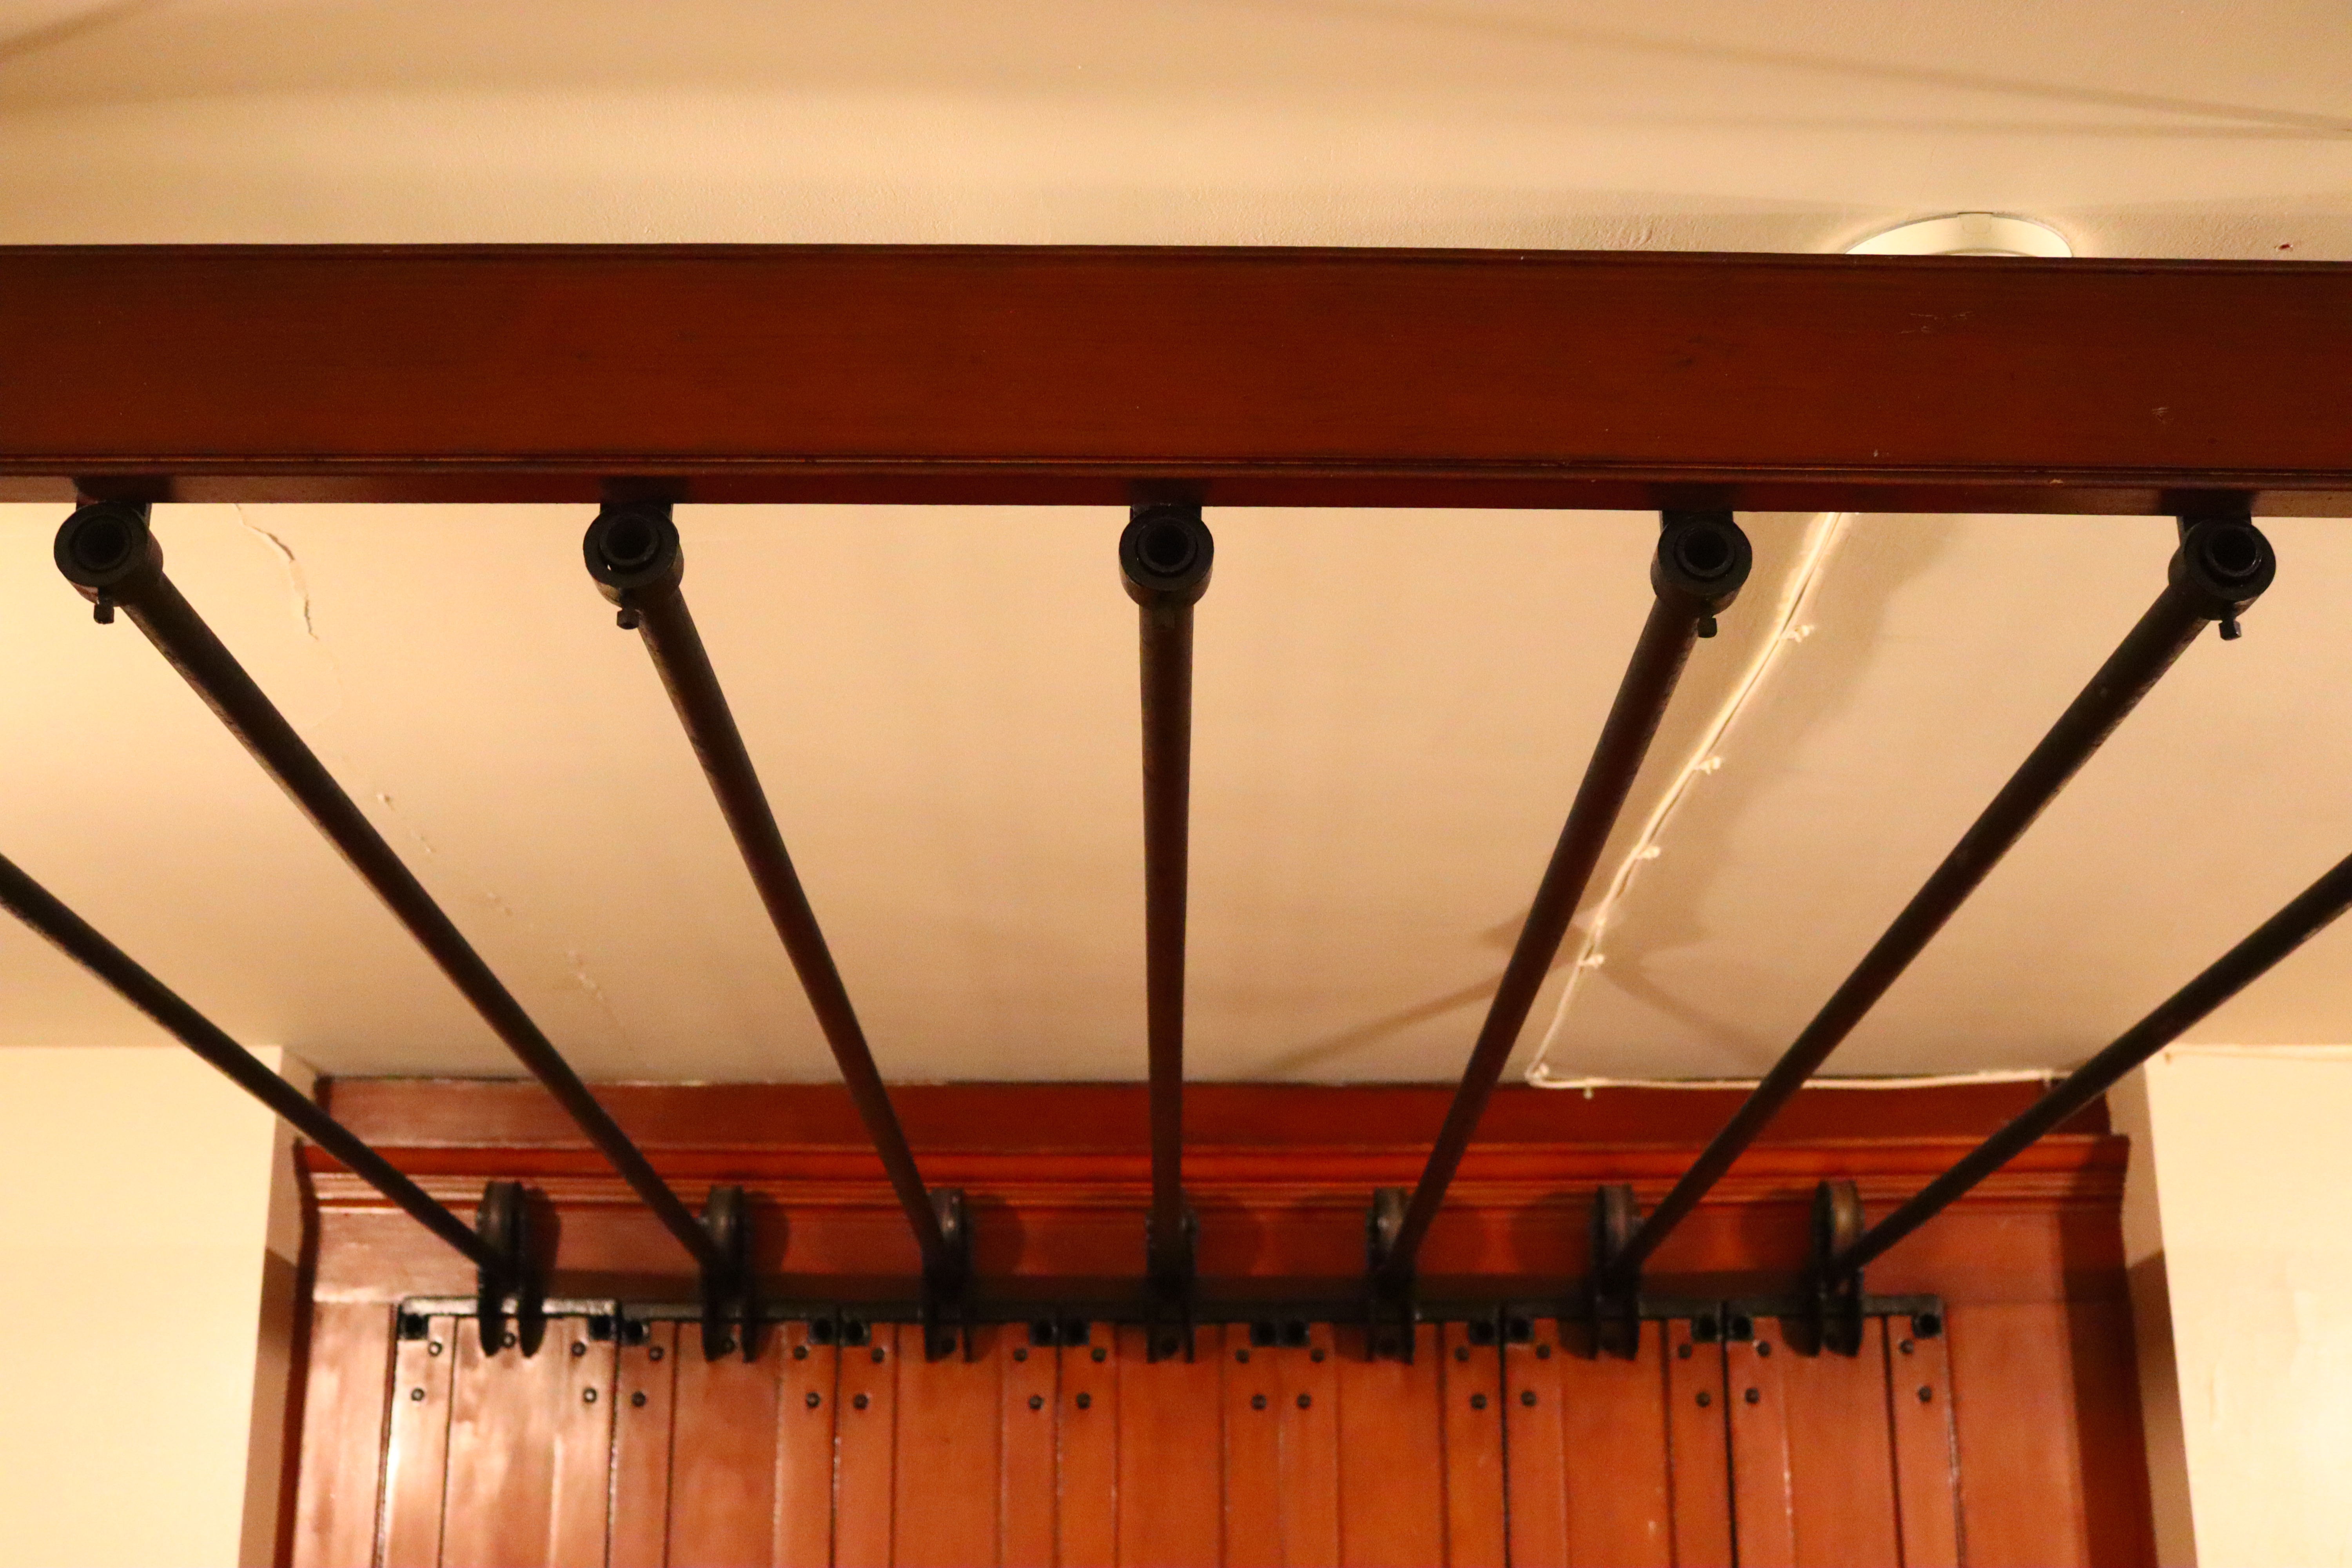 Metal rails suspended by a wooden bracket and a wall.